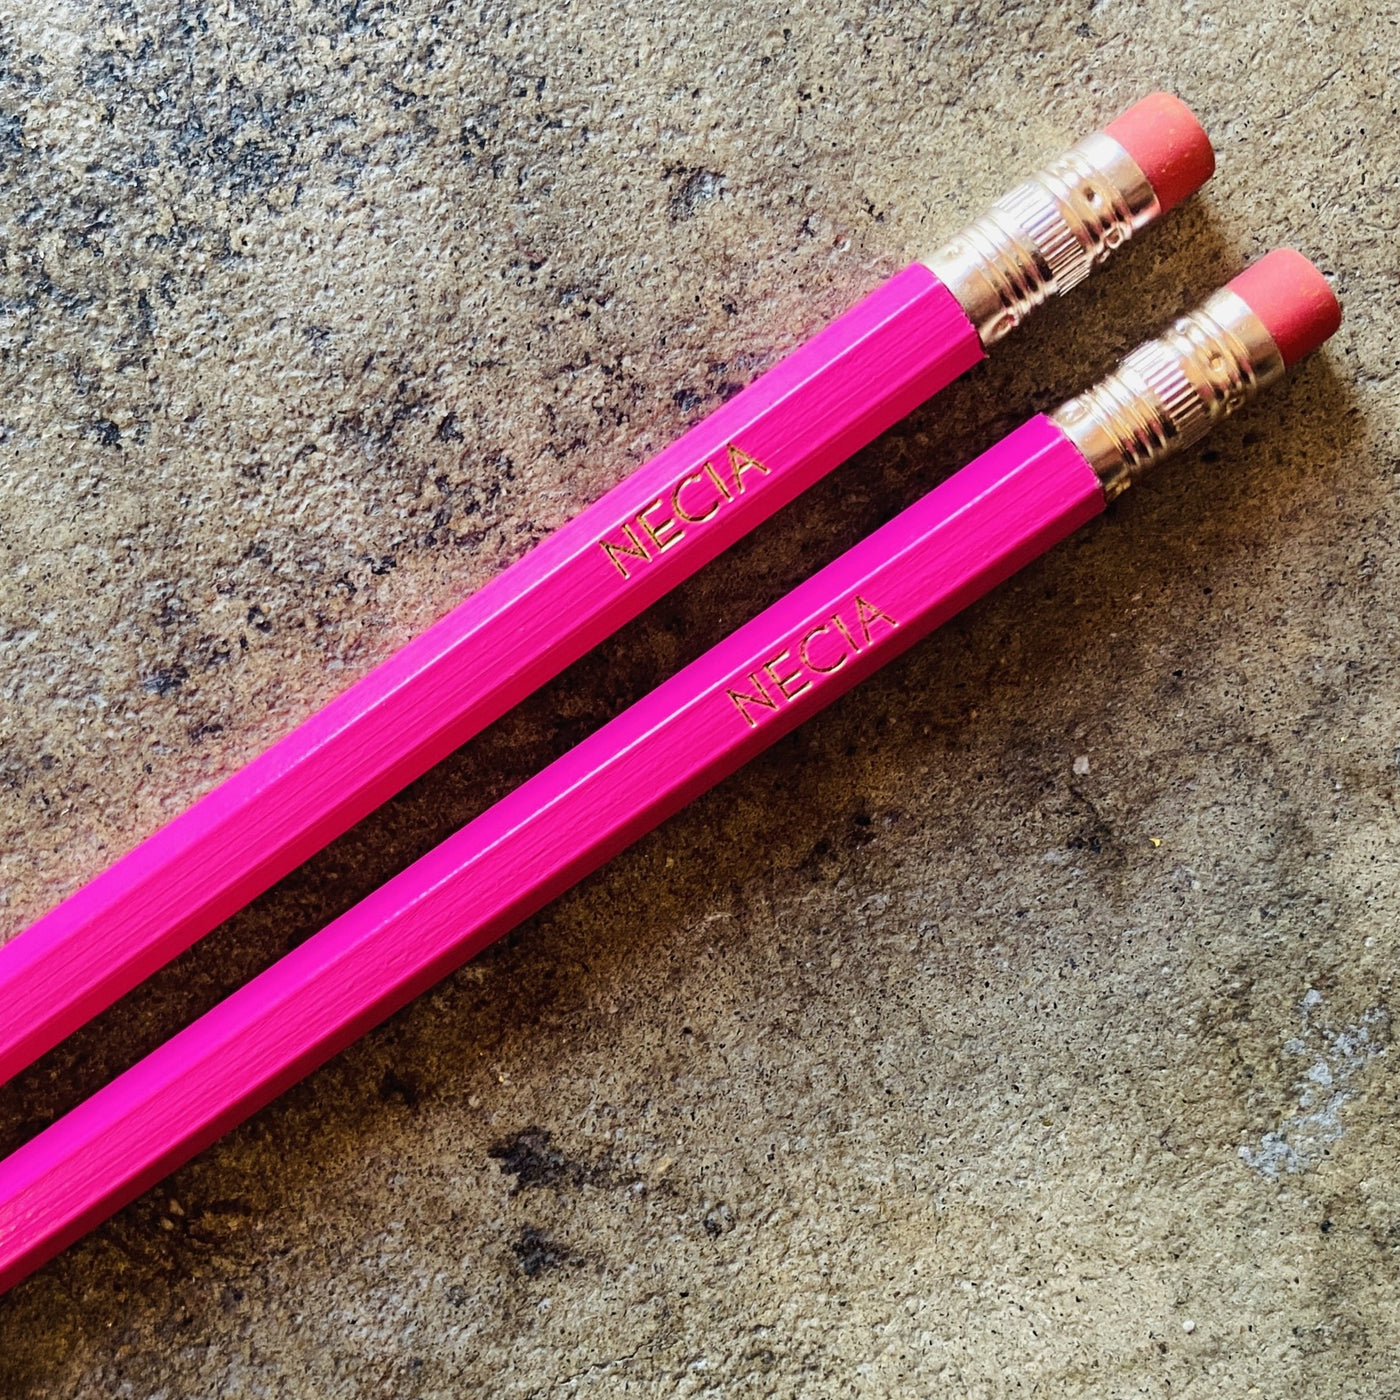 Top view of Necia phrase pencils in bright pink.